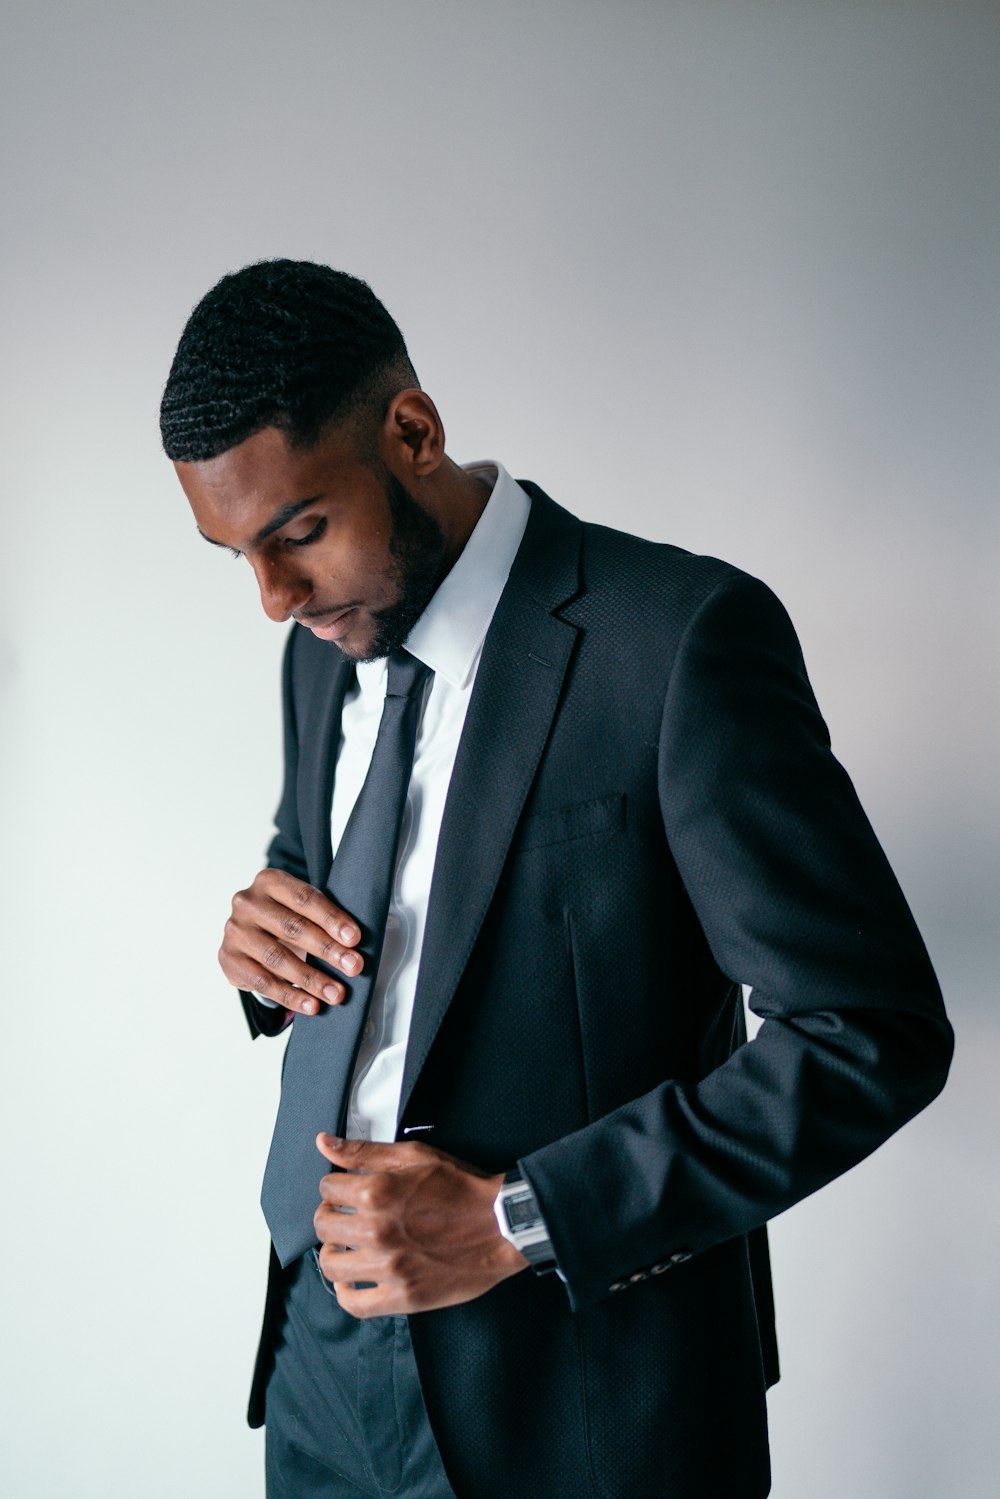 999+ Black Man In Suit Pictures | Download Free Images on Unsplash